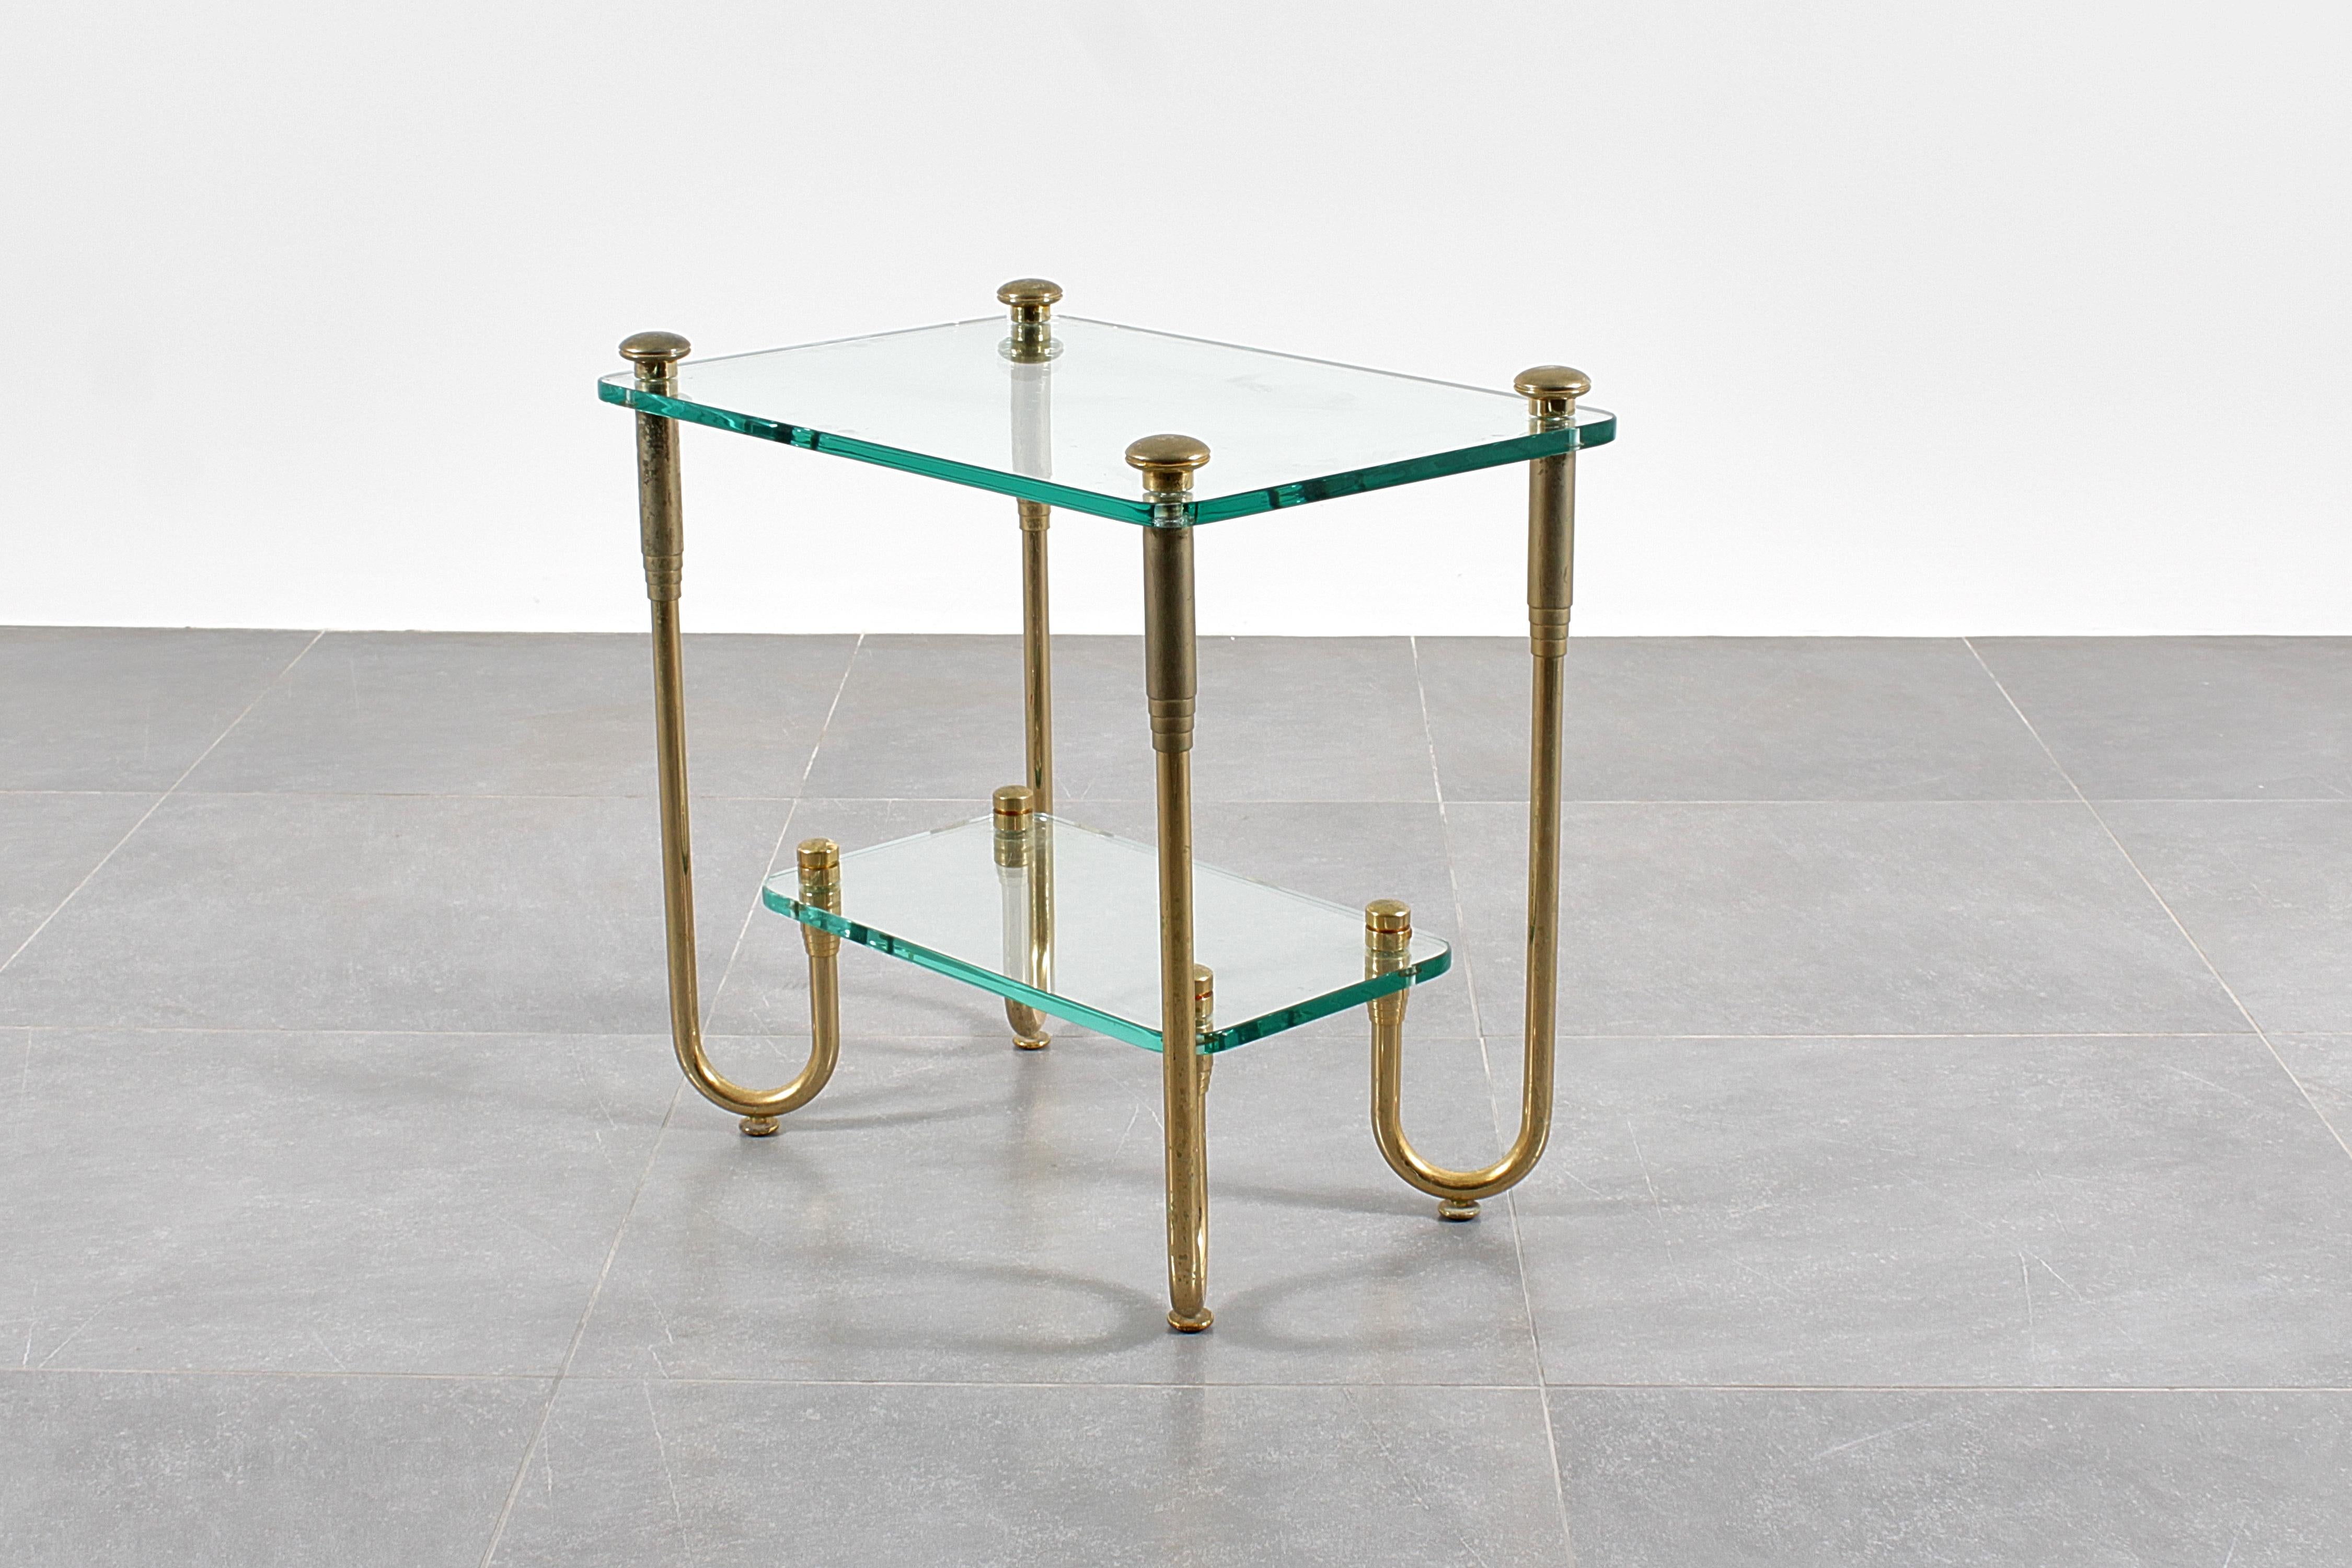 Very beautiful two-tier side table in Hollywood Regency style, with thick Nile green glass tops supported by four imposing bent brass tubular legs. Italian production from the 70s.
Wear consistent with age and use.